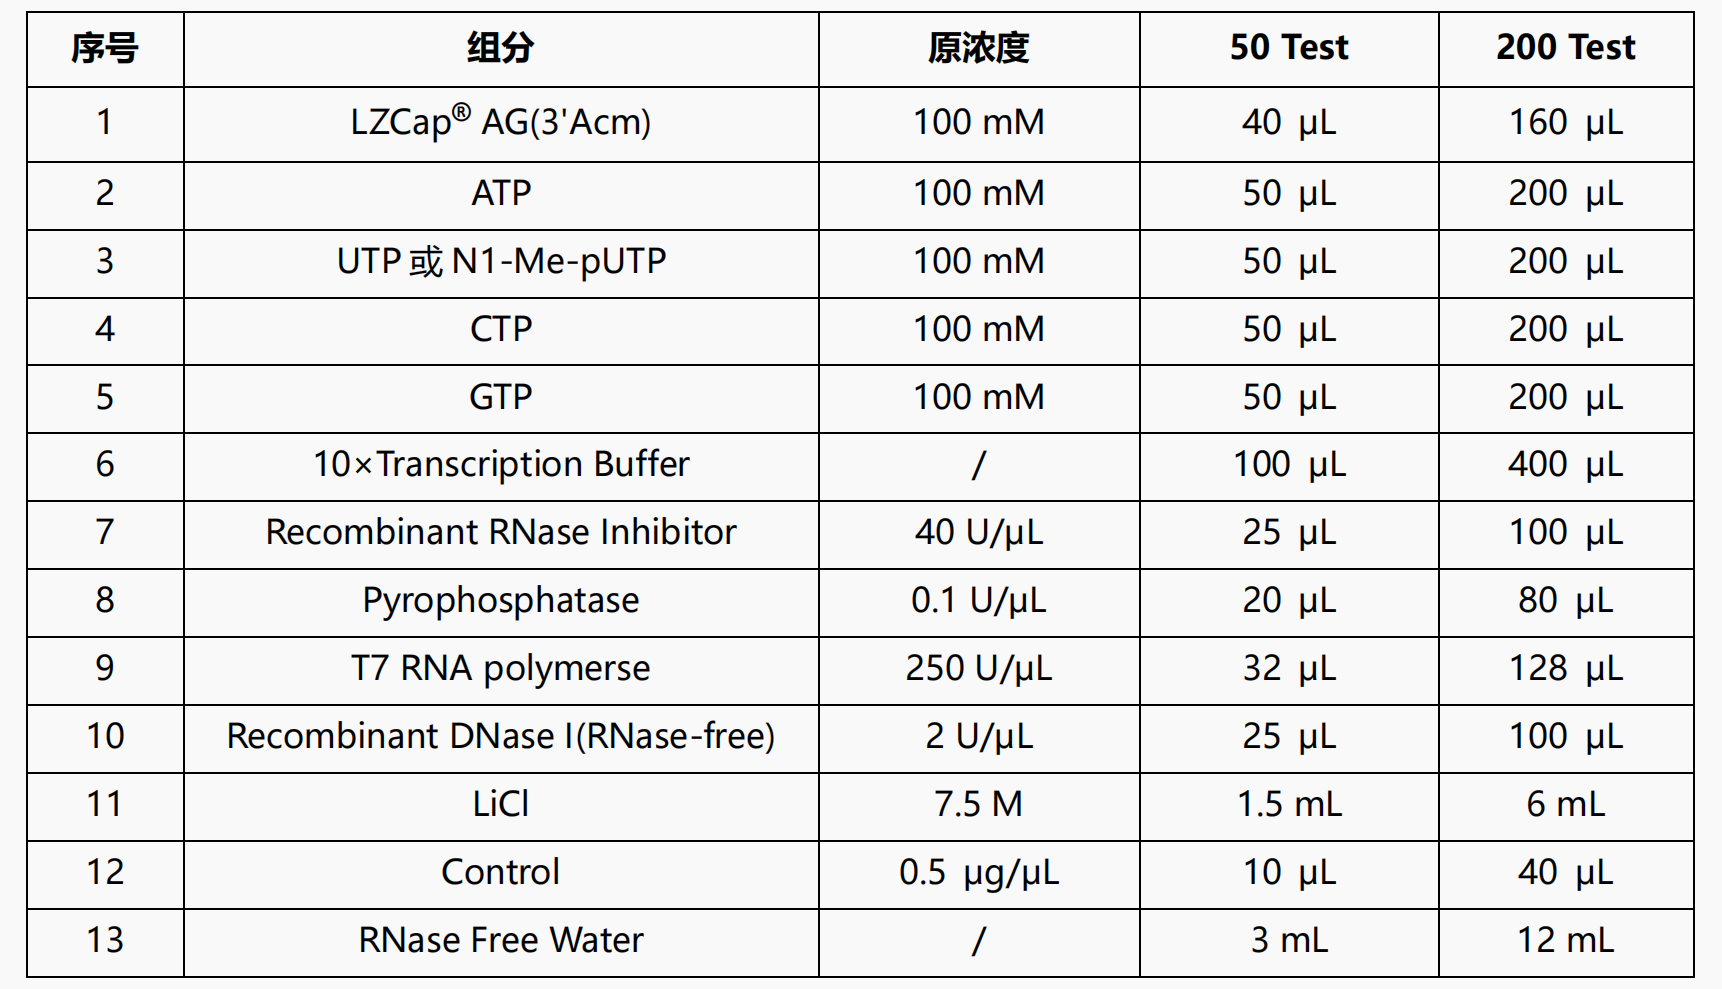 LZCap® AG Capping Kit (含N1-Me-pUTP)组分表.png